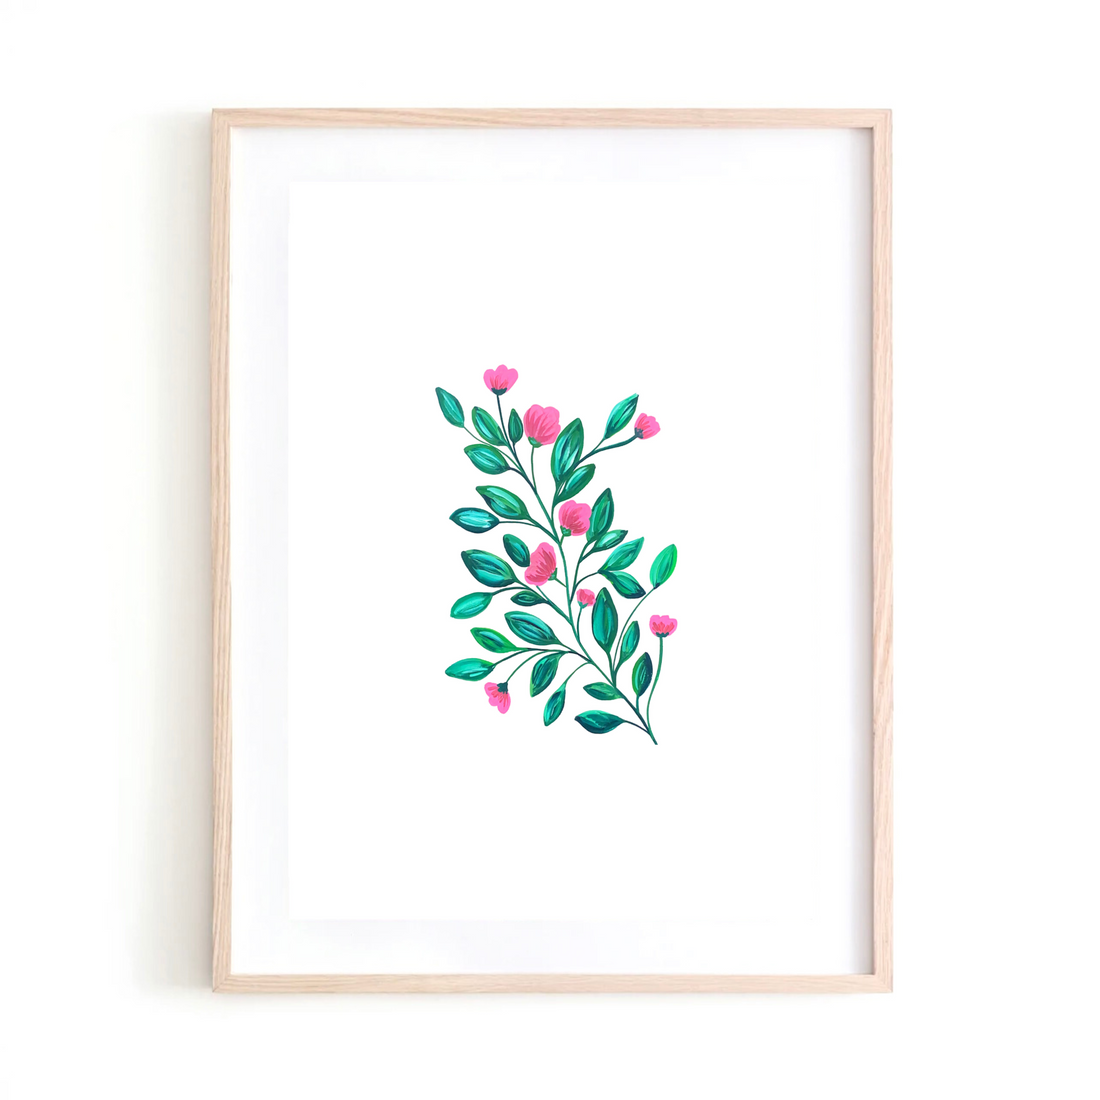 Bright Pink and Green Flowers art print